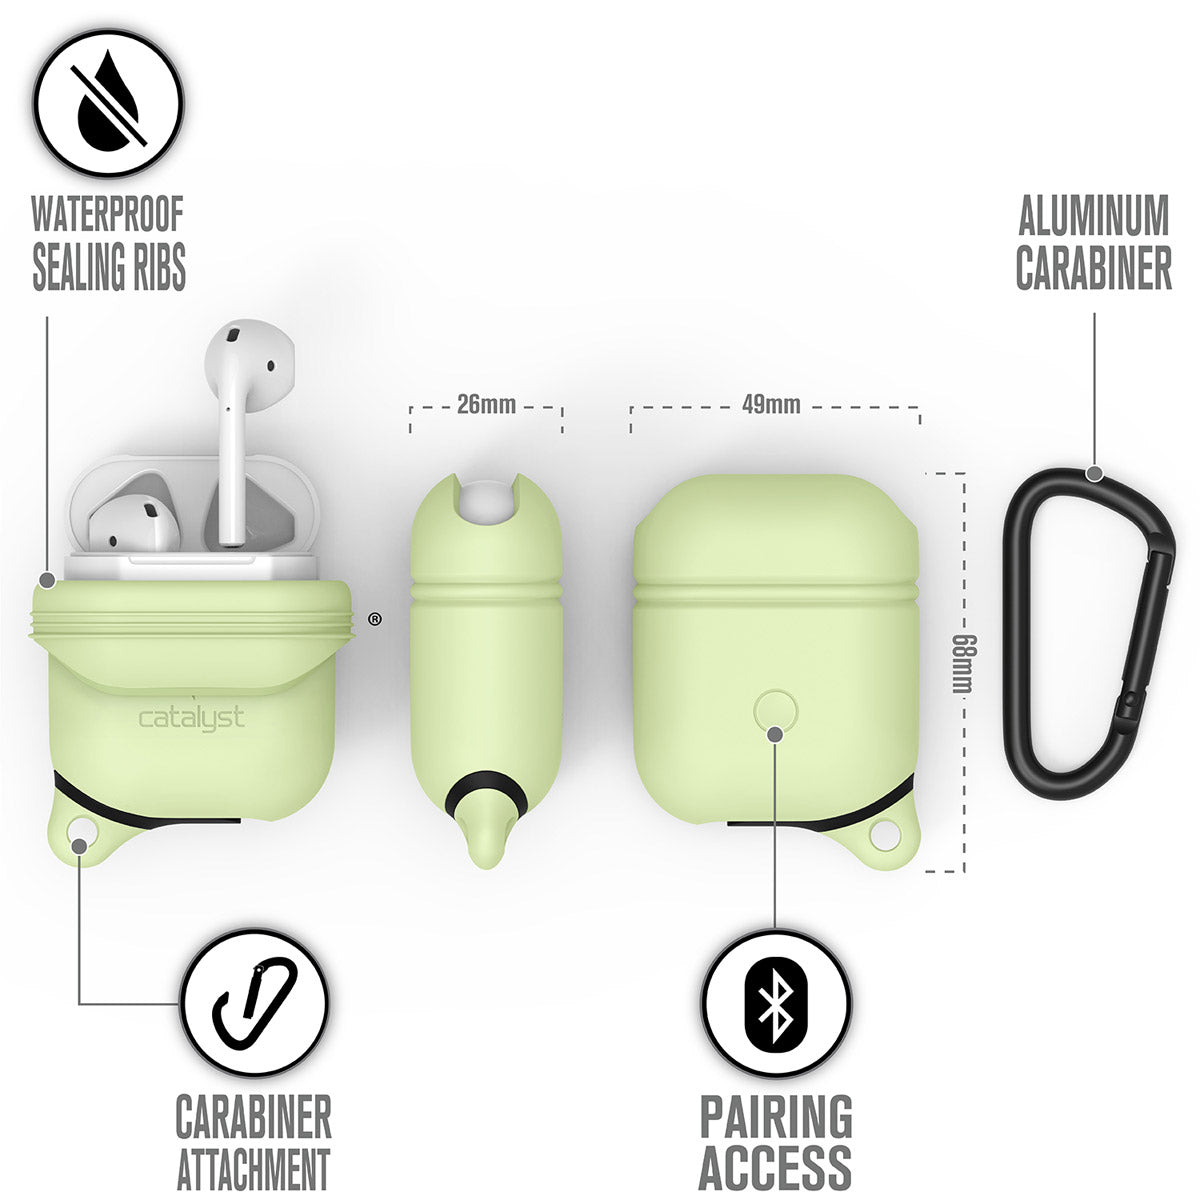 Catalyst airpods gen2/1 waterproof case + carabiner showing the case dimension and features in glow in the dark text reads waterproof sealing ribs aluminum carabiner pairing access carabiner attachment